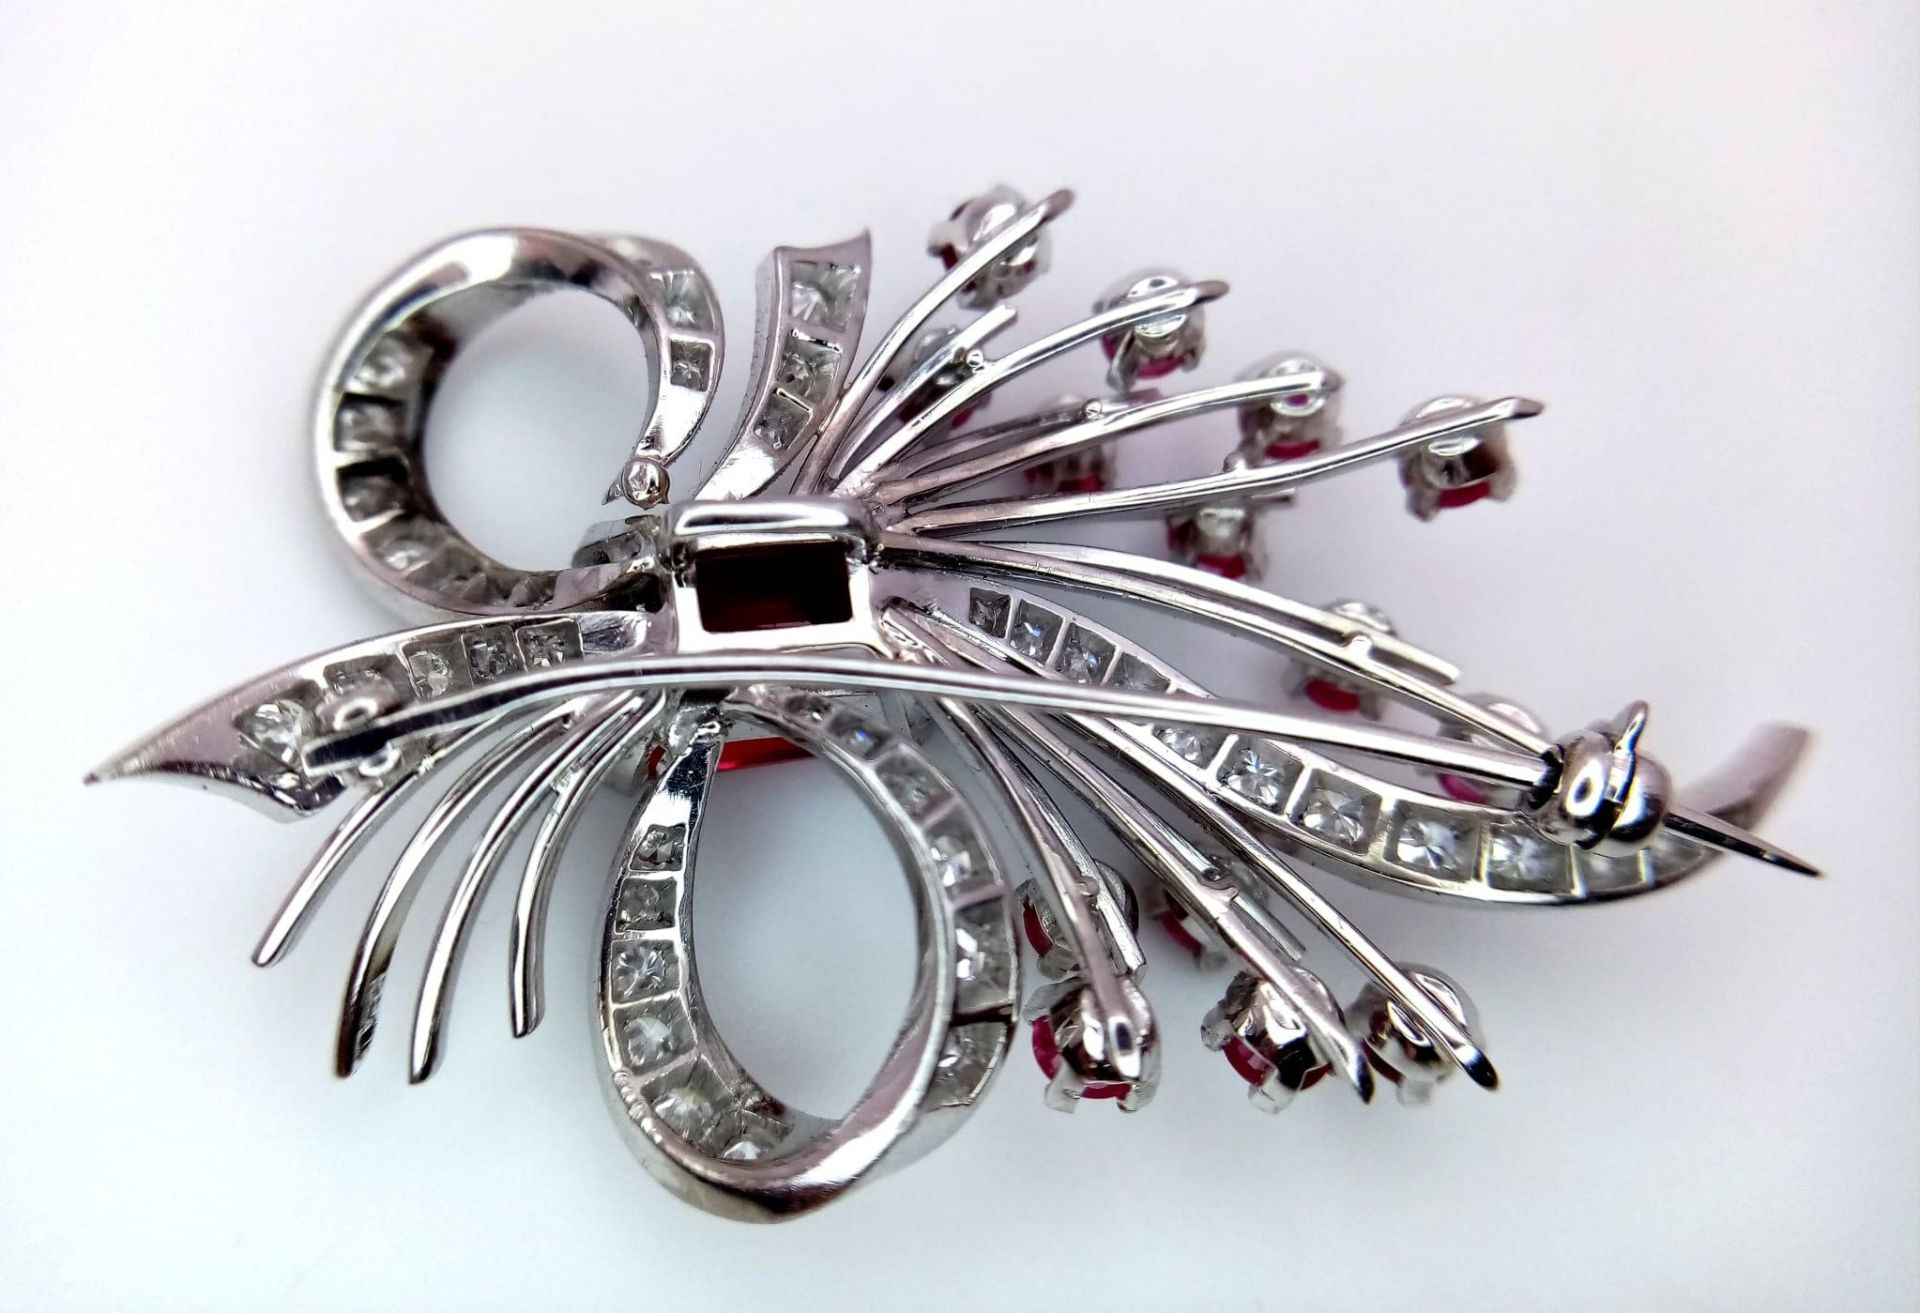 A STUNNING DIAMOND AND RUBY BROOCH SET IN PLATINUM , A MAJESTIC SPRAY OF RUBIES EMINATING FROM A - Image 7 of 7